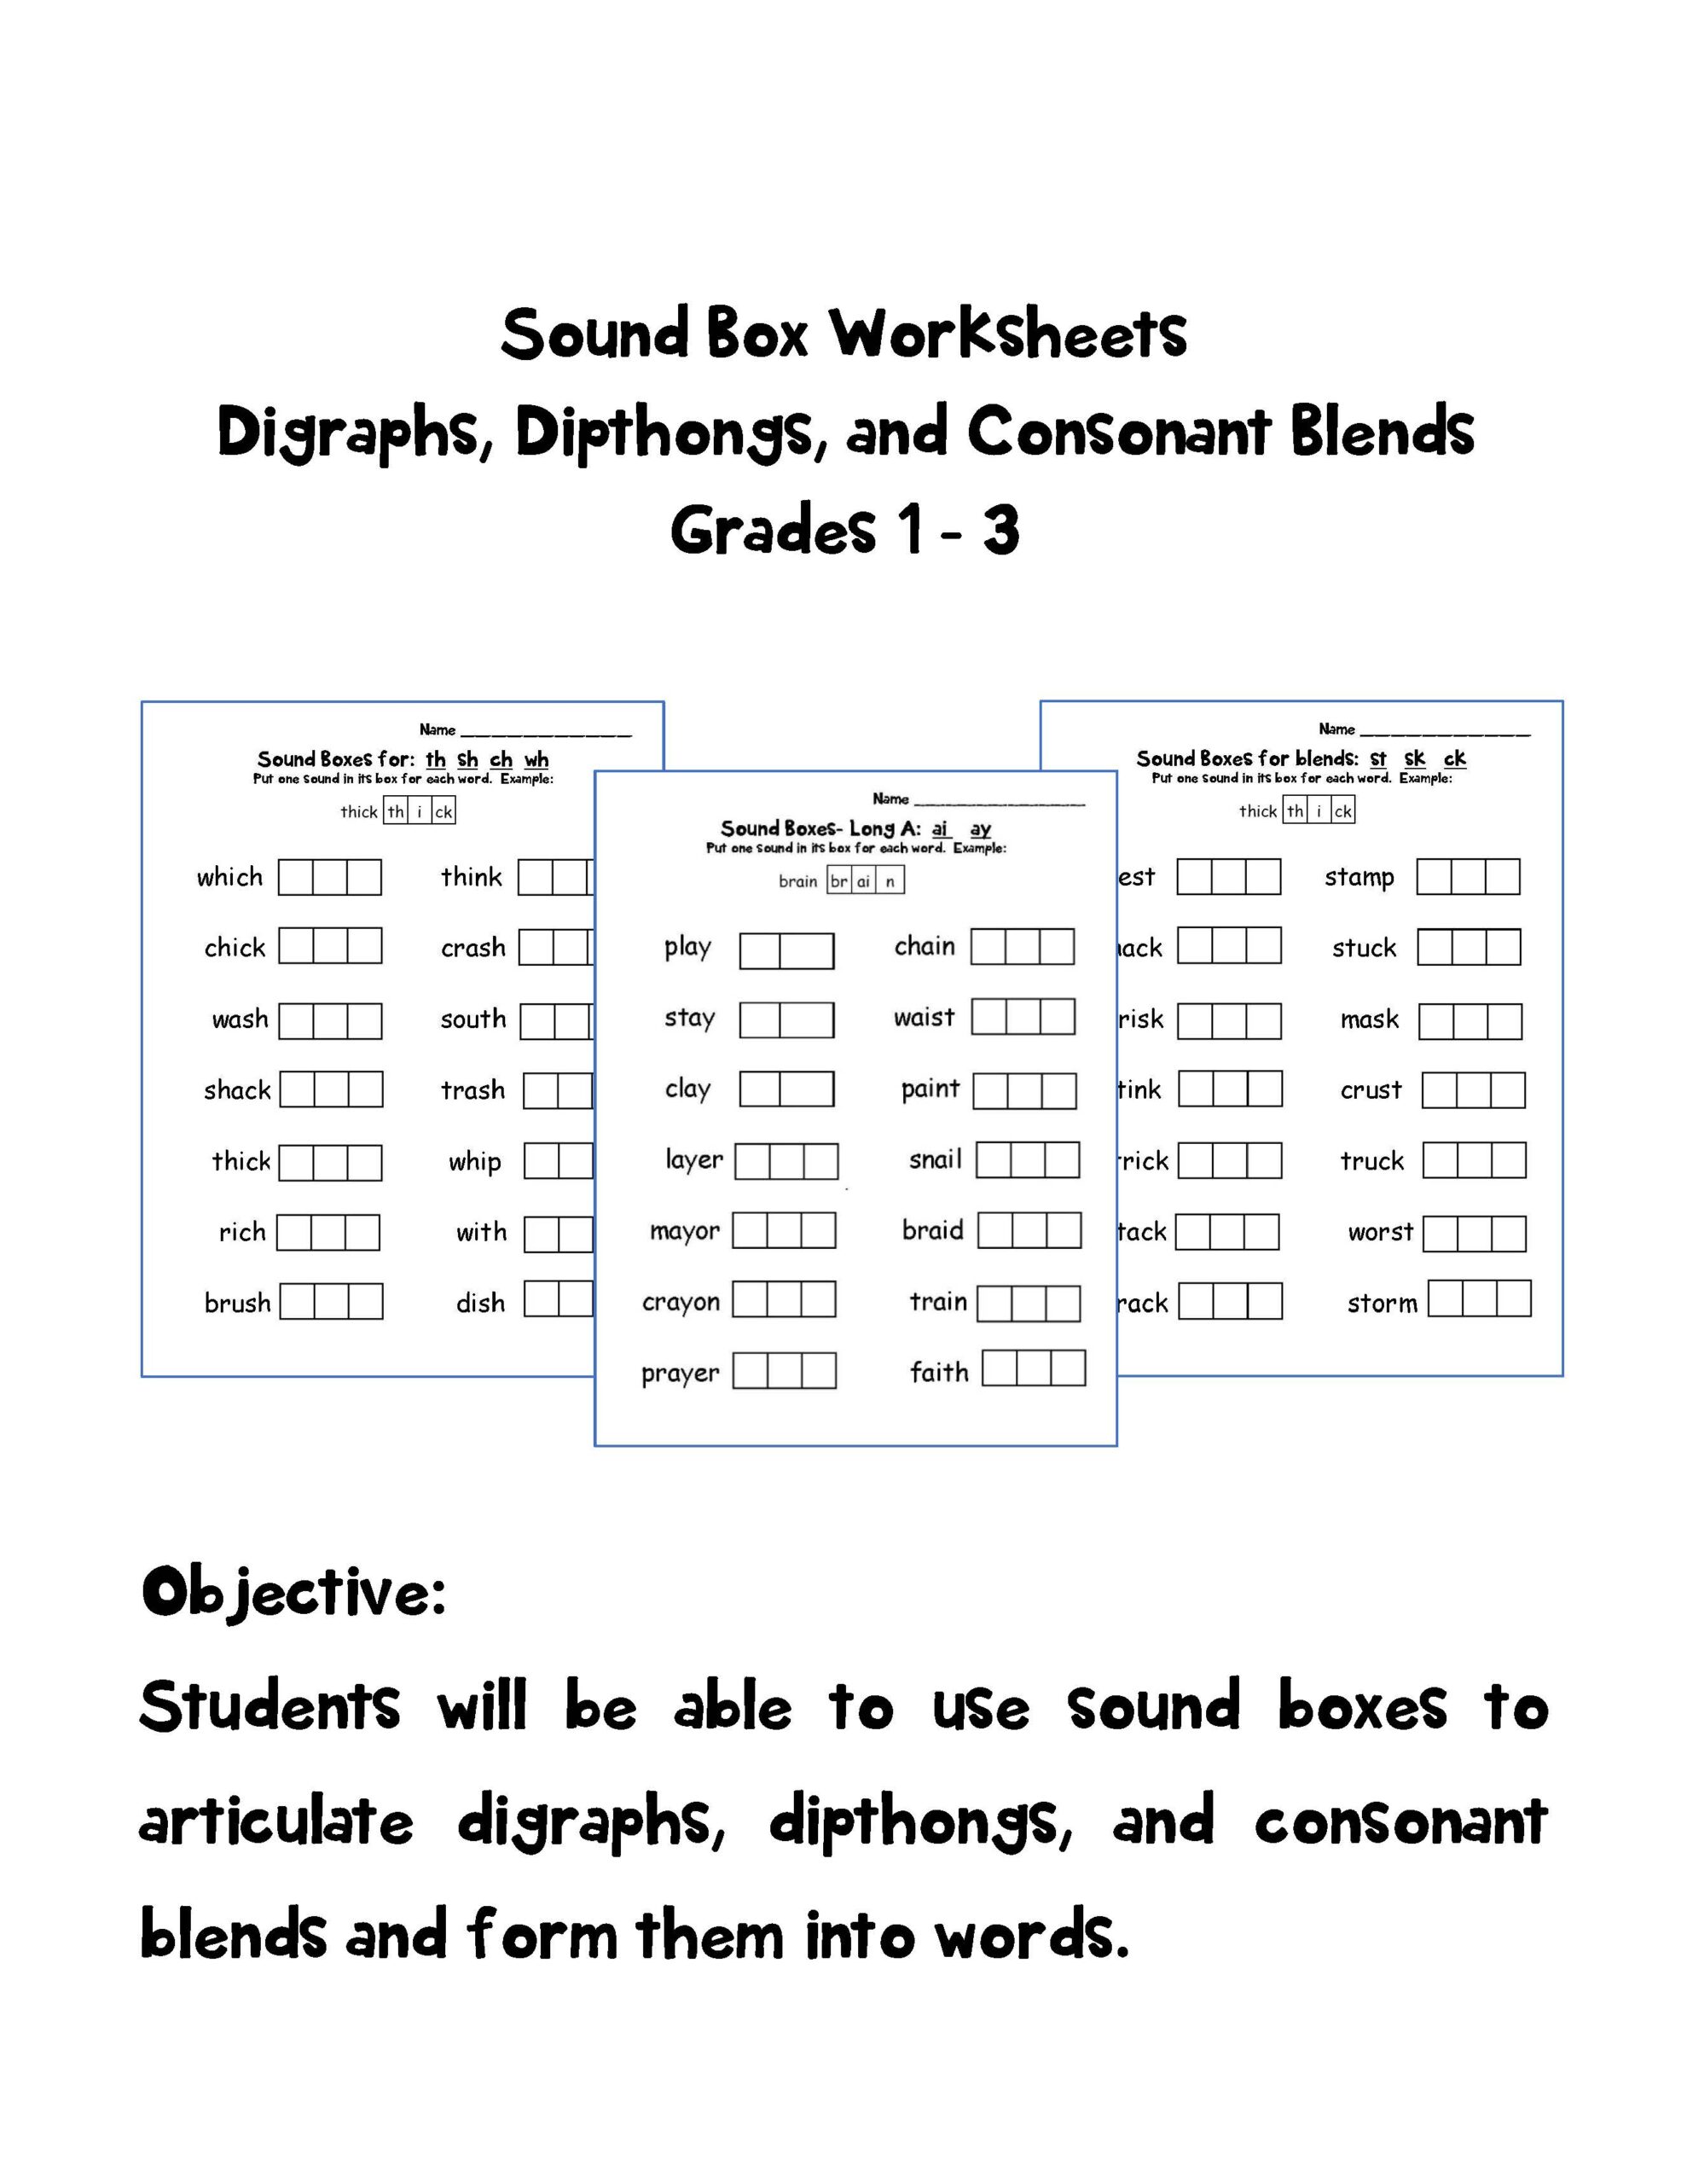 Phonics: Sound Boxes for Digraphs, Dipthongs, and Consonant Blends Grades 1 - 3 Show preview image 1 Show preview image 2 Show preview image 3 View Preview